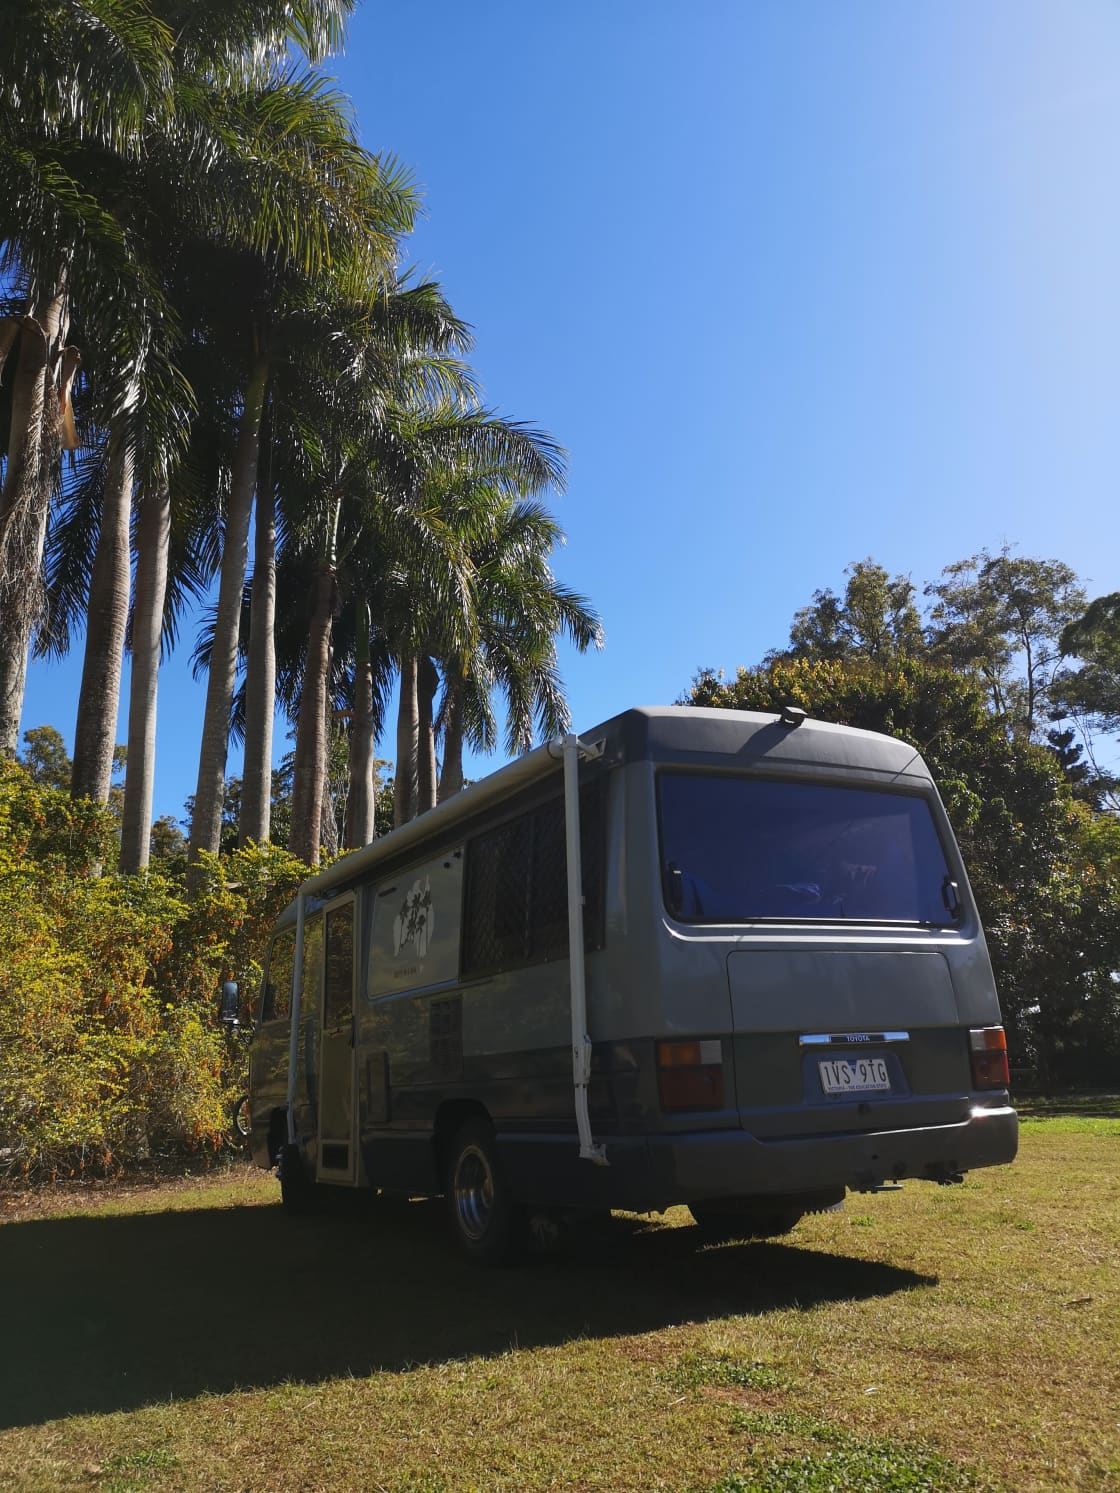 Parked up by the palms